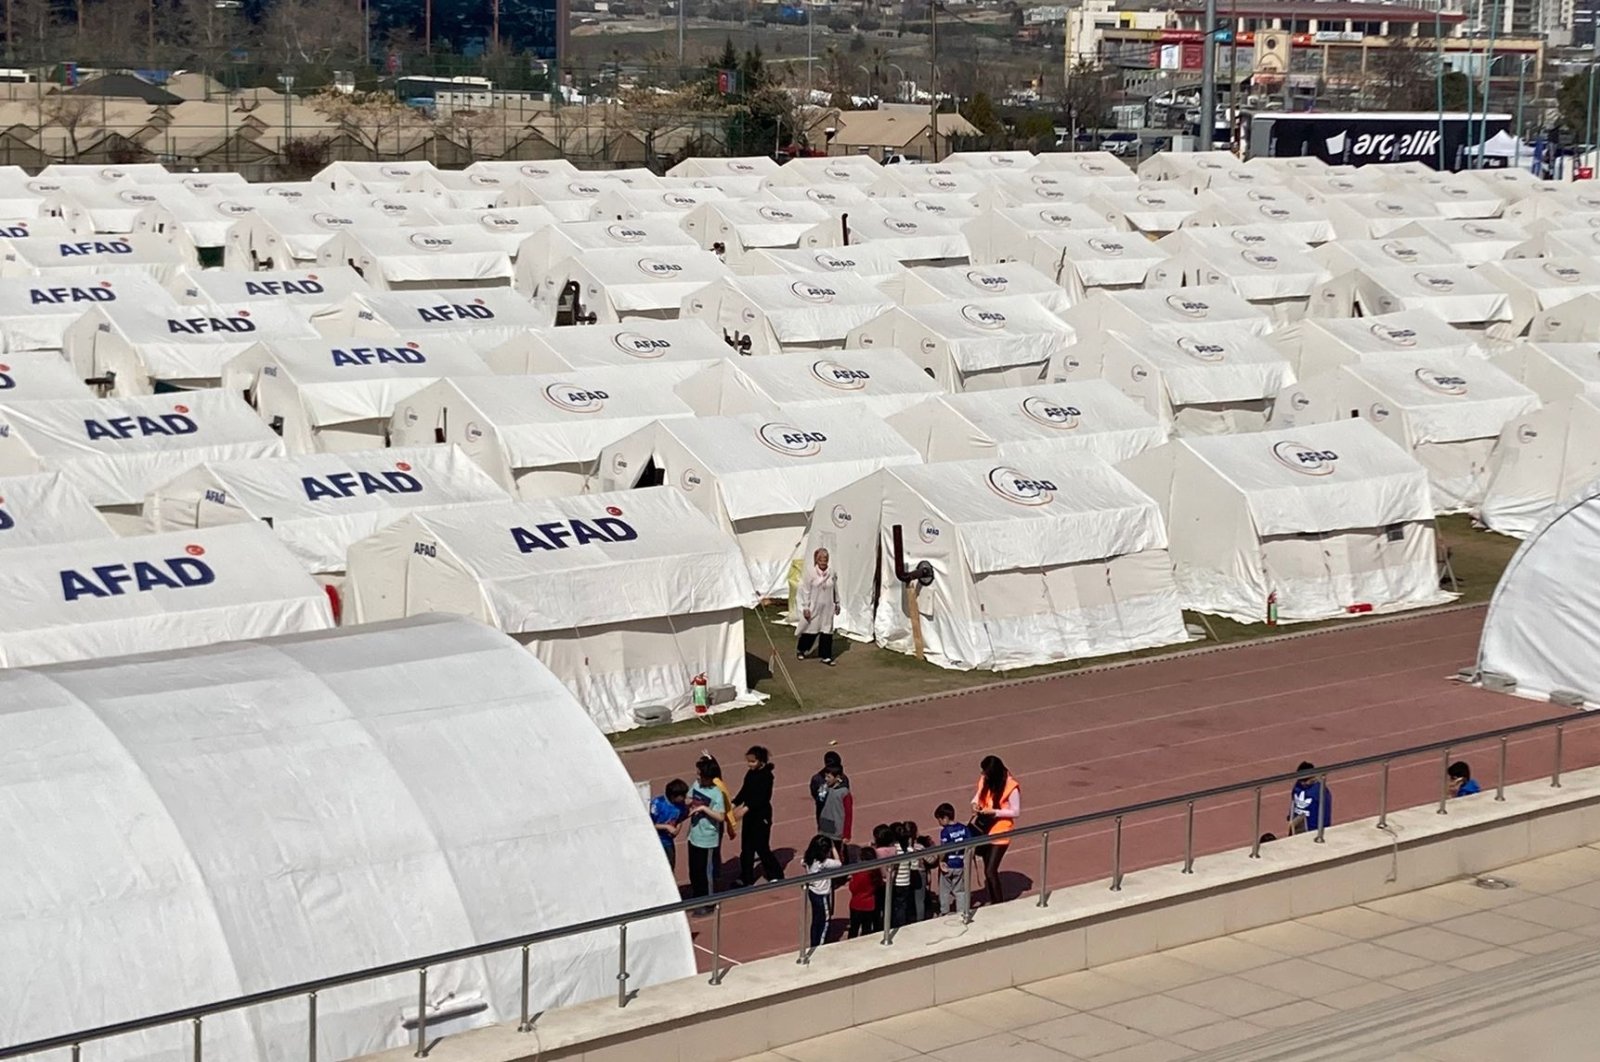 A view of tents set up for displaced earthquake survivors, in Kahramanmaraş, southern Türkiye, March 2, 2023. (Photo by Mehmet Çelik)